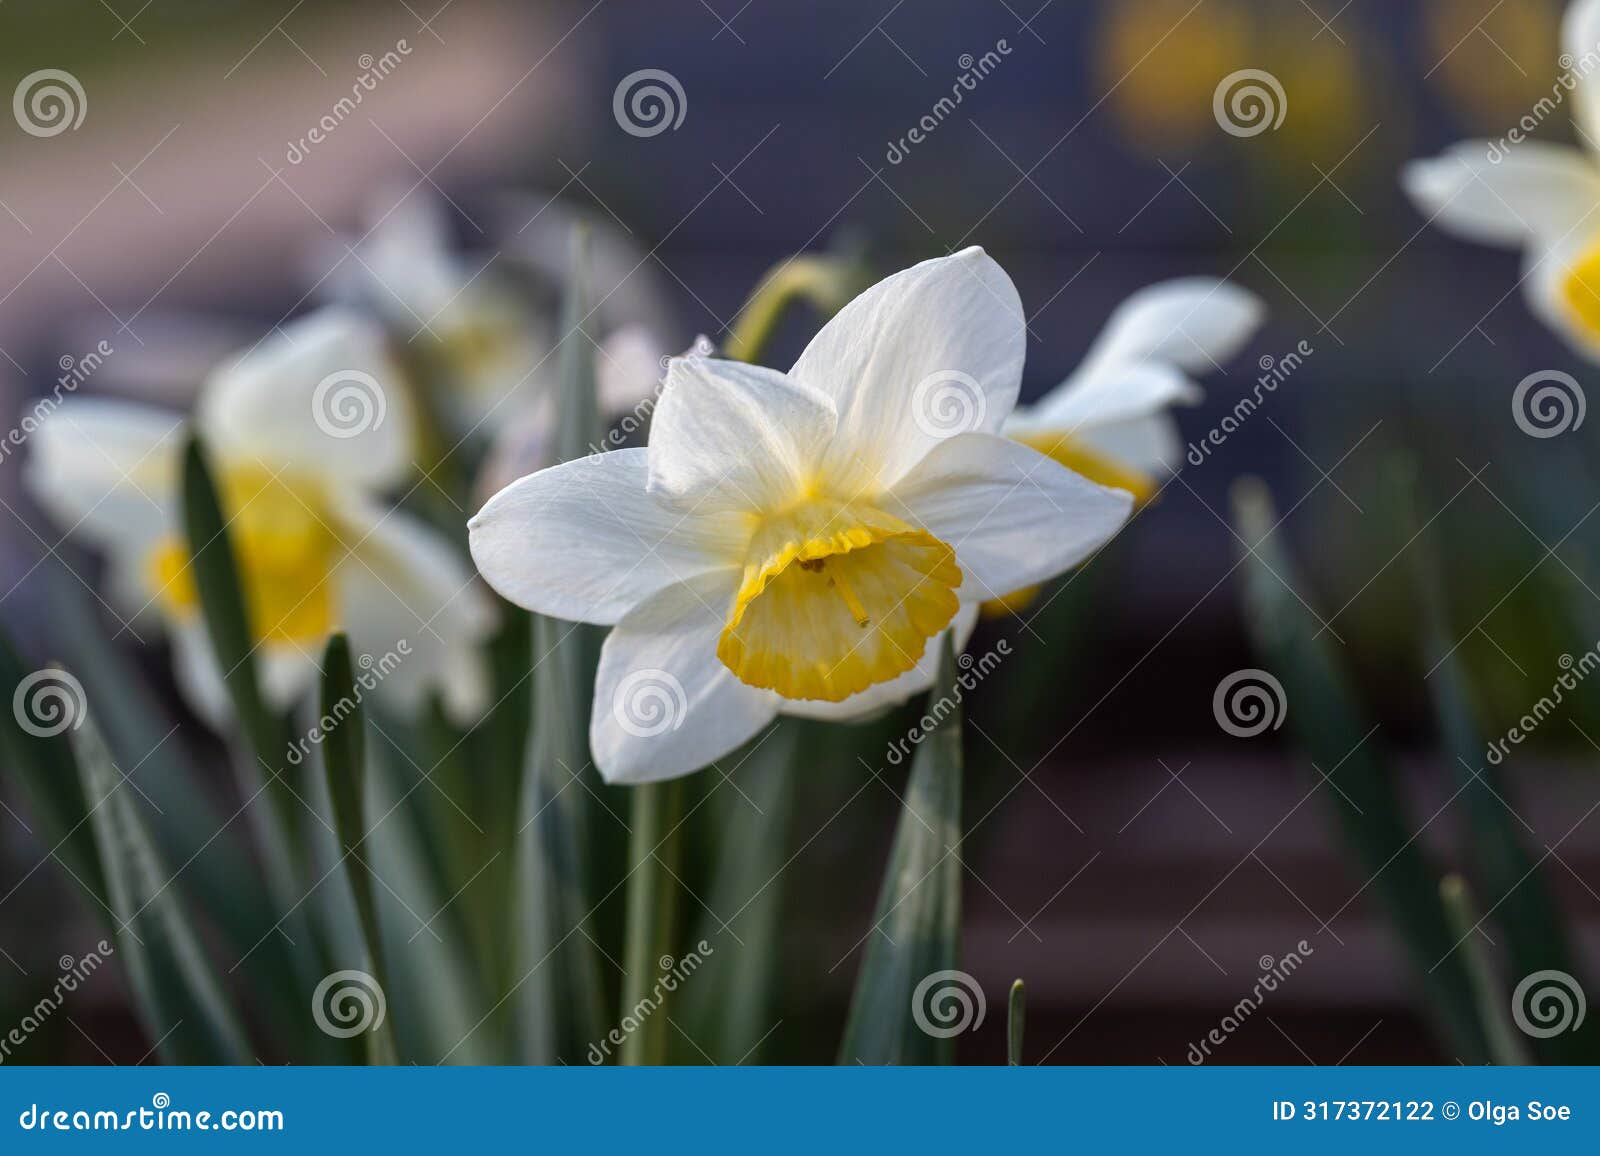 white flower of daffodil narcissus cultivar obdam from double group